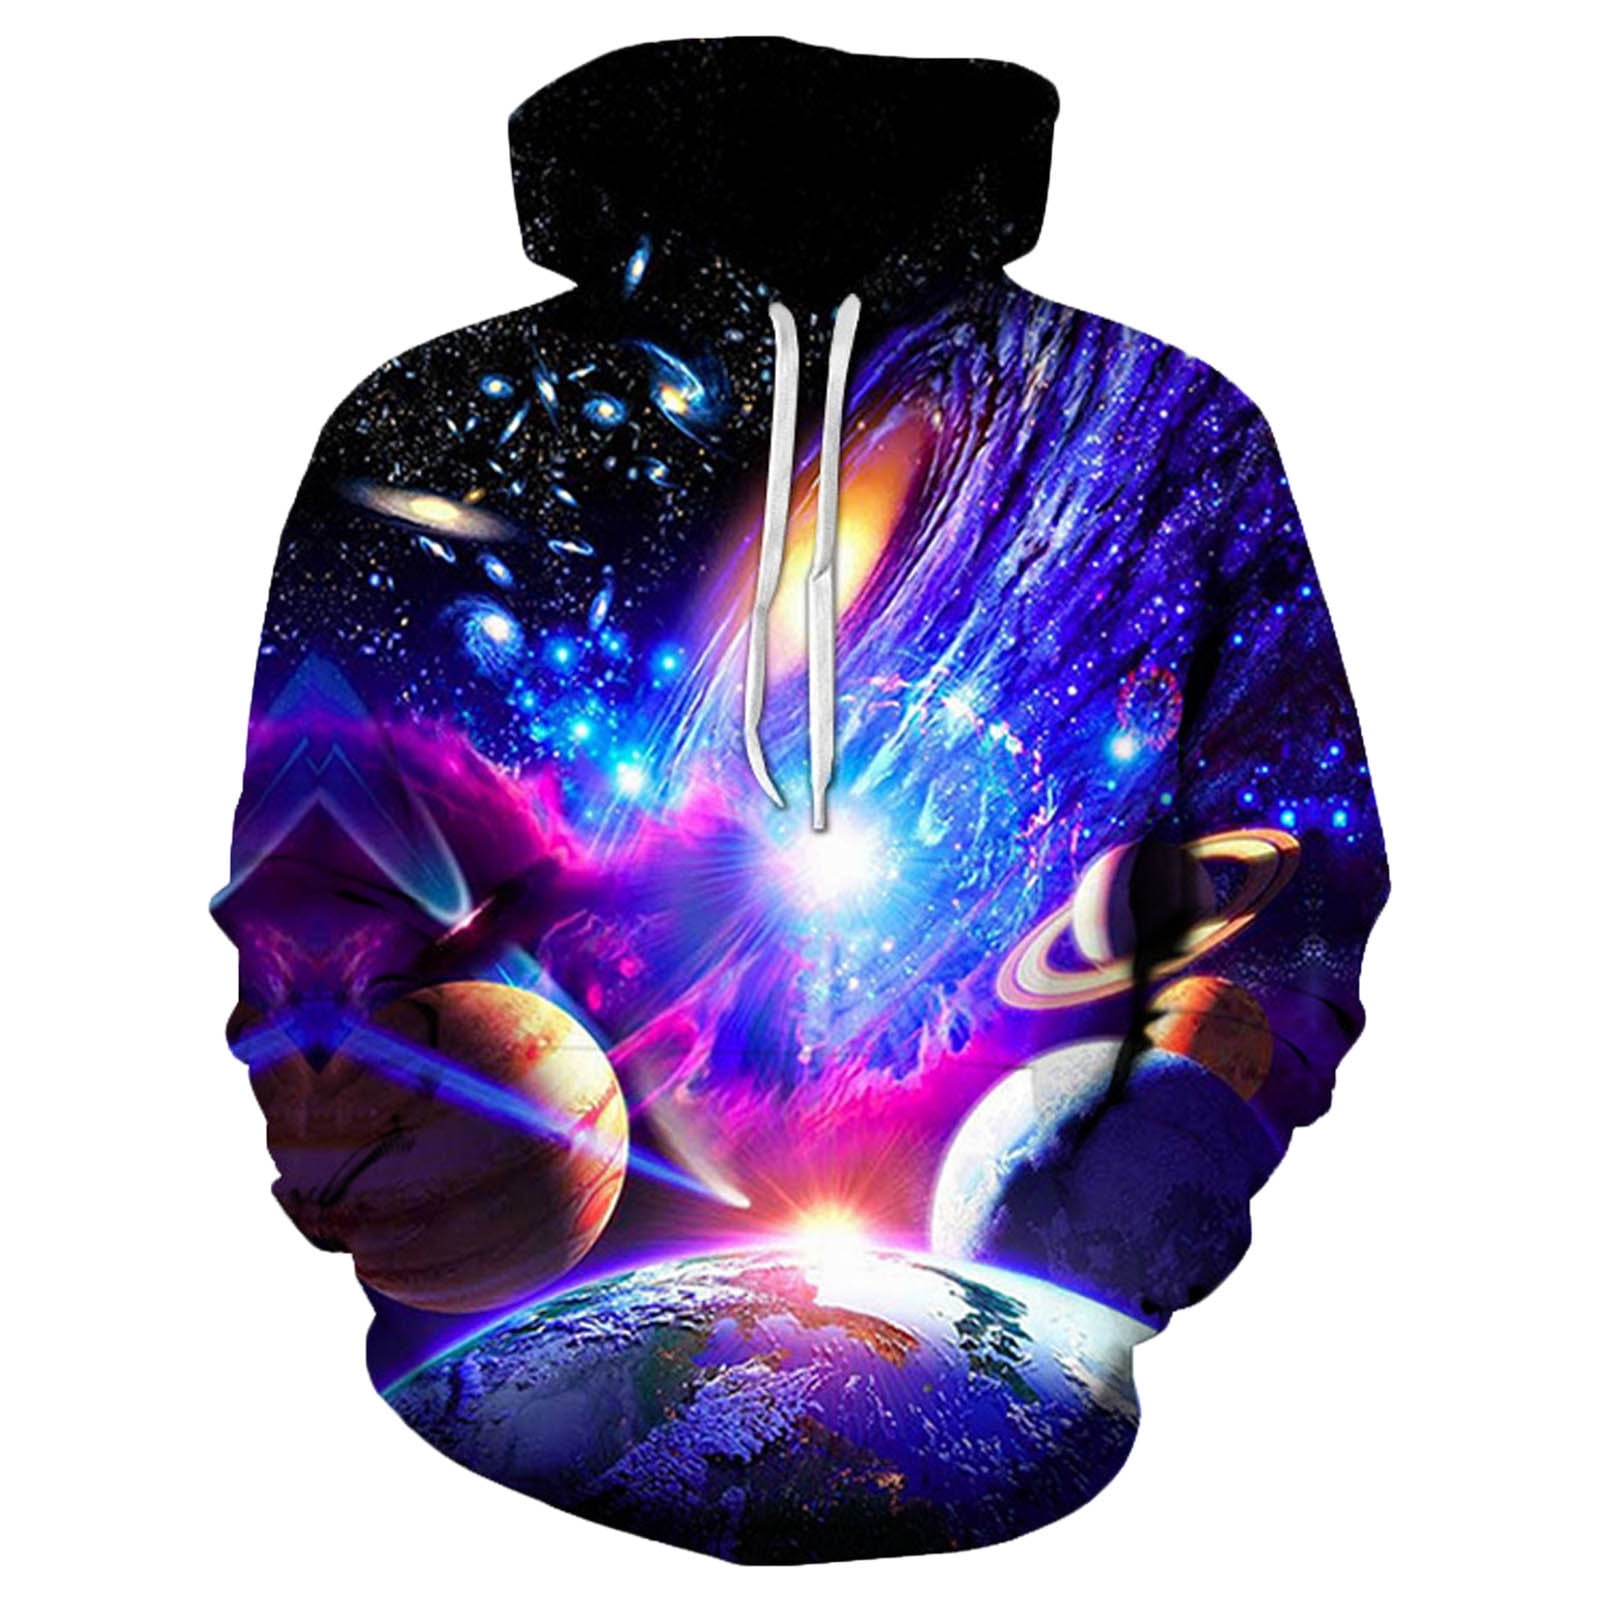 BEST PRICE GUARANTEE Quality and Comfort Unisex Novelty Hoodie NASA ...